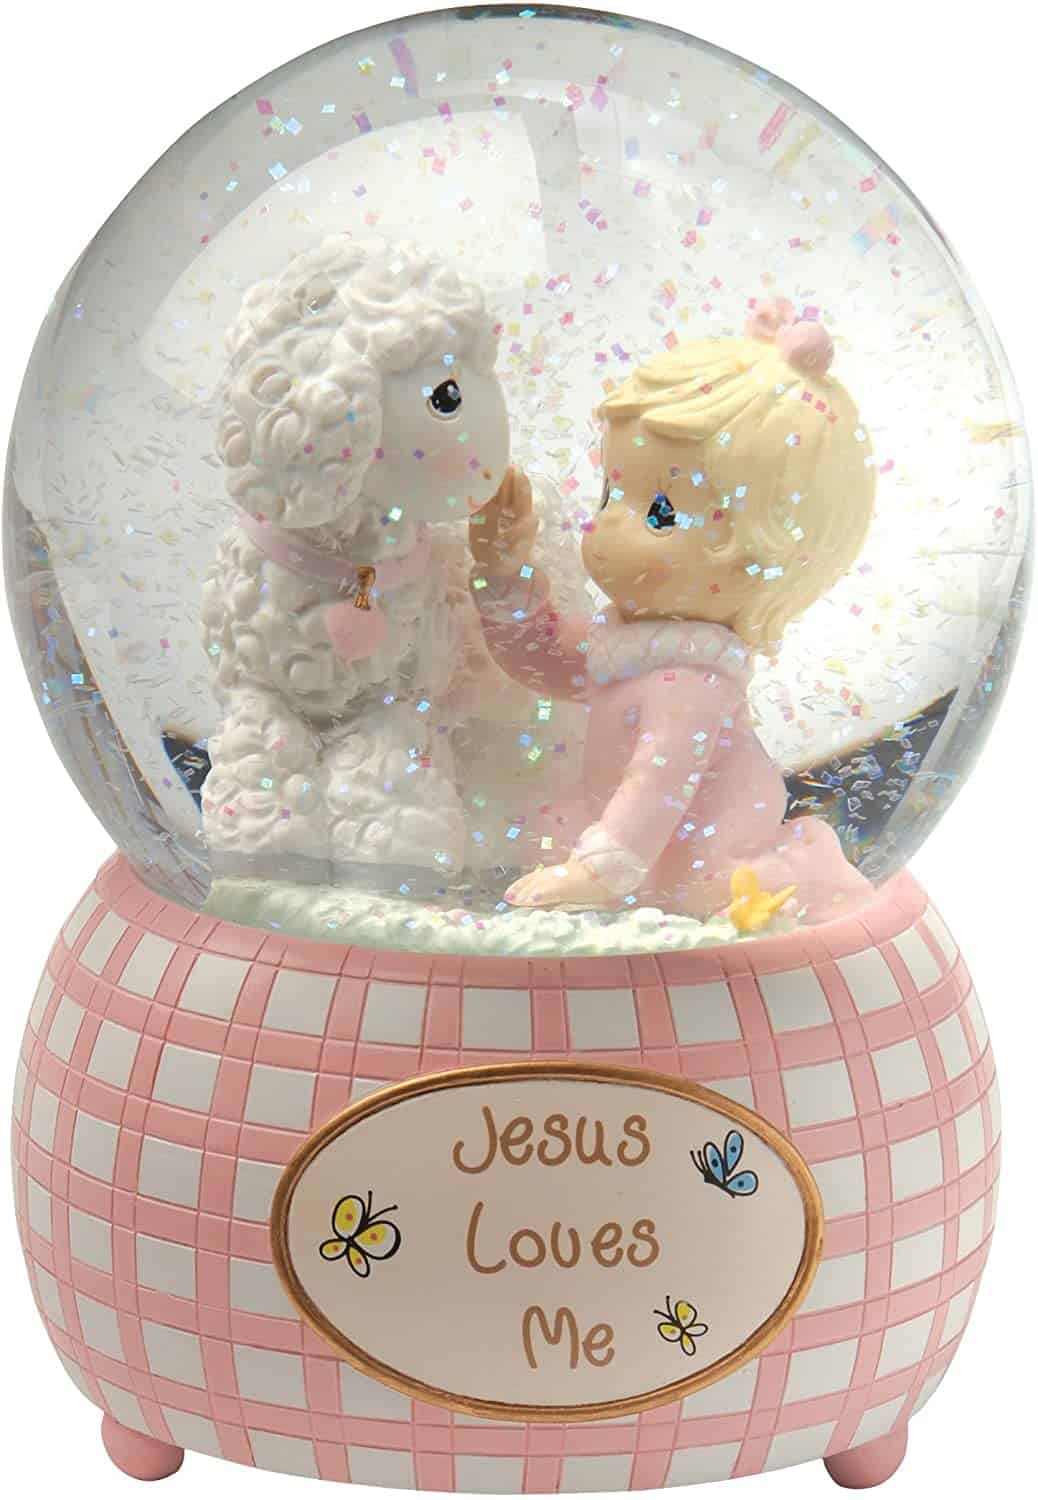 Pink Snow Globe with text "Jesus loves me"